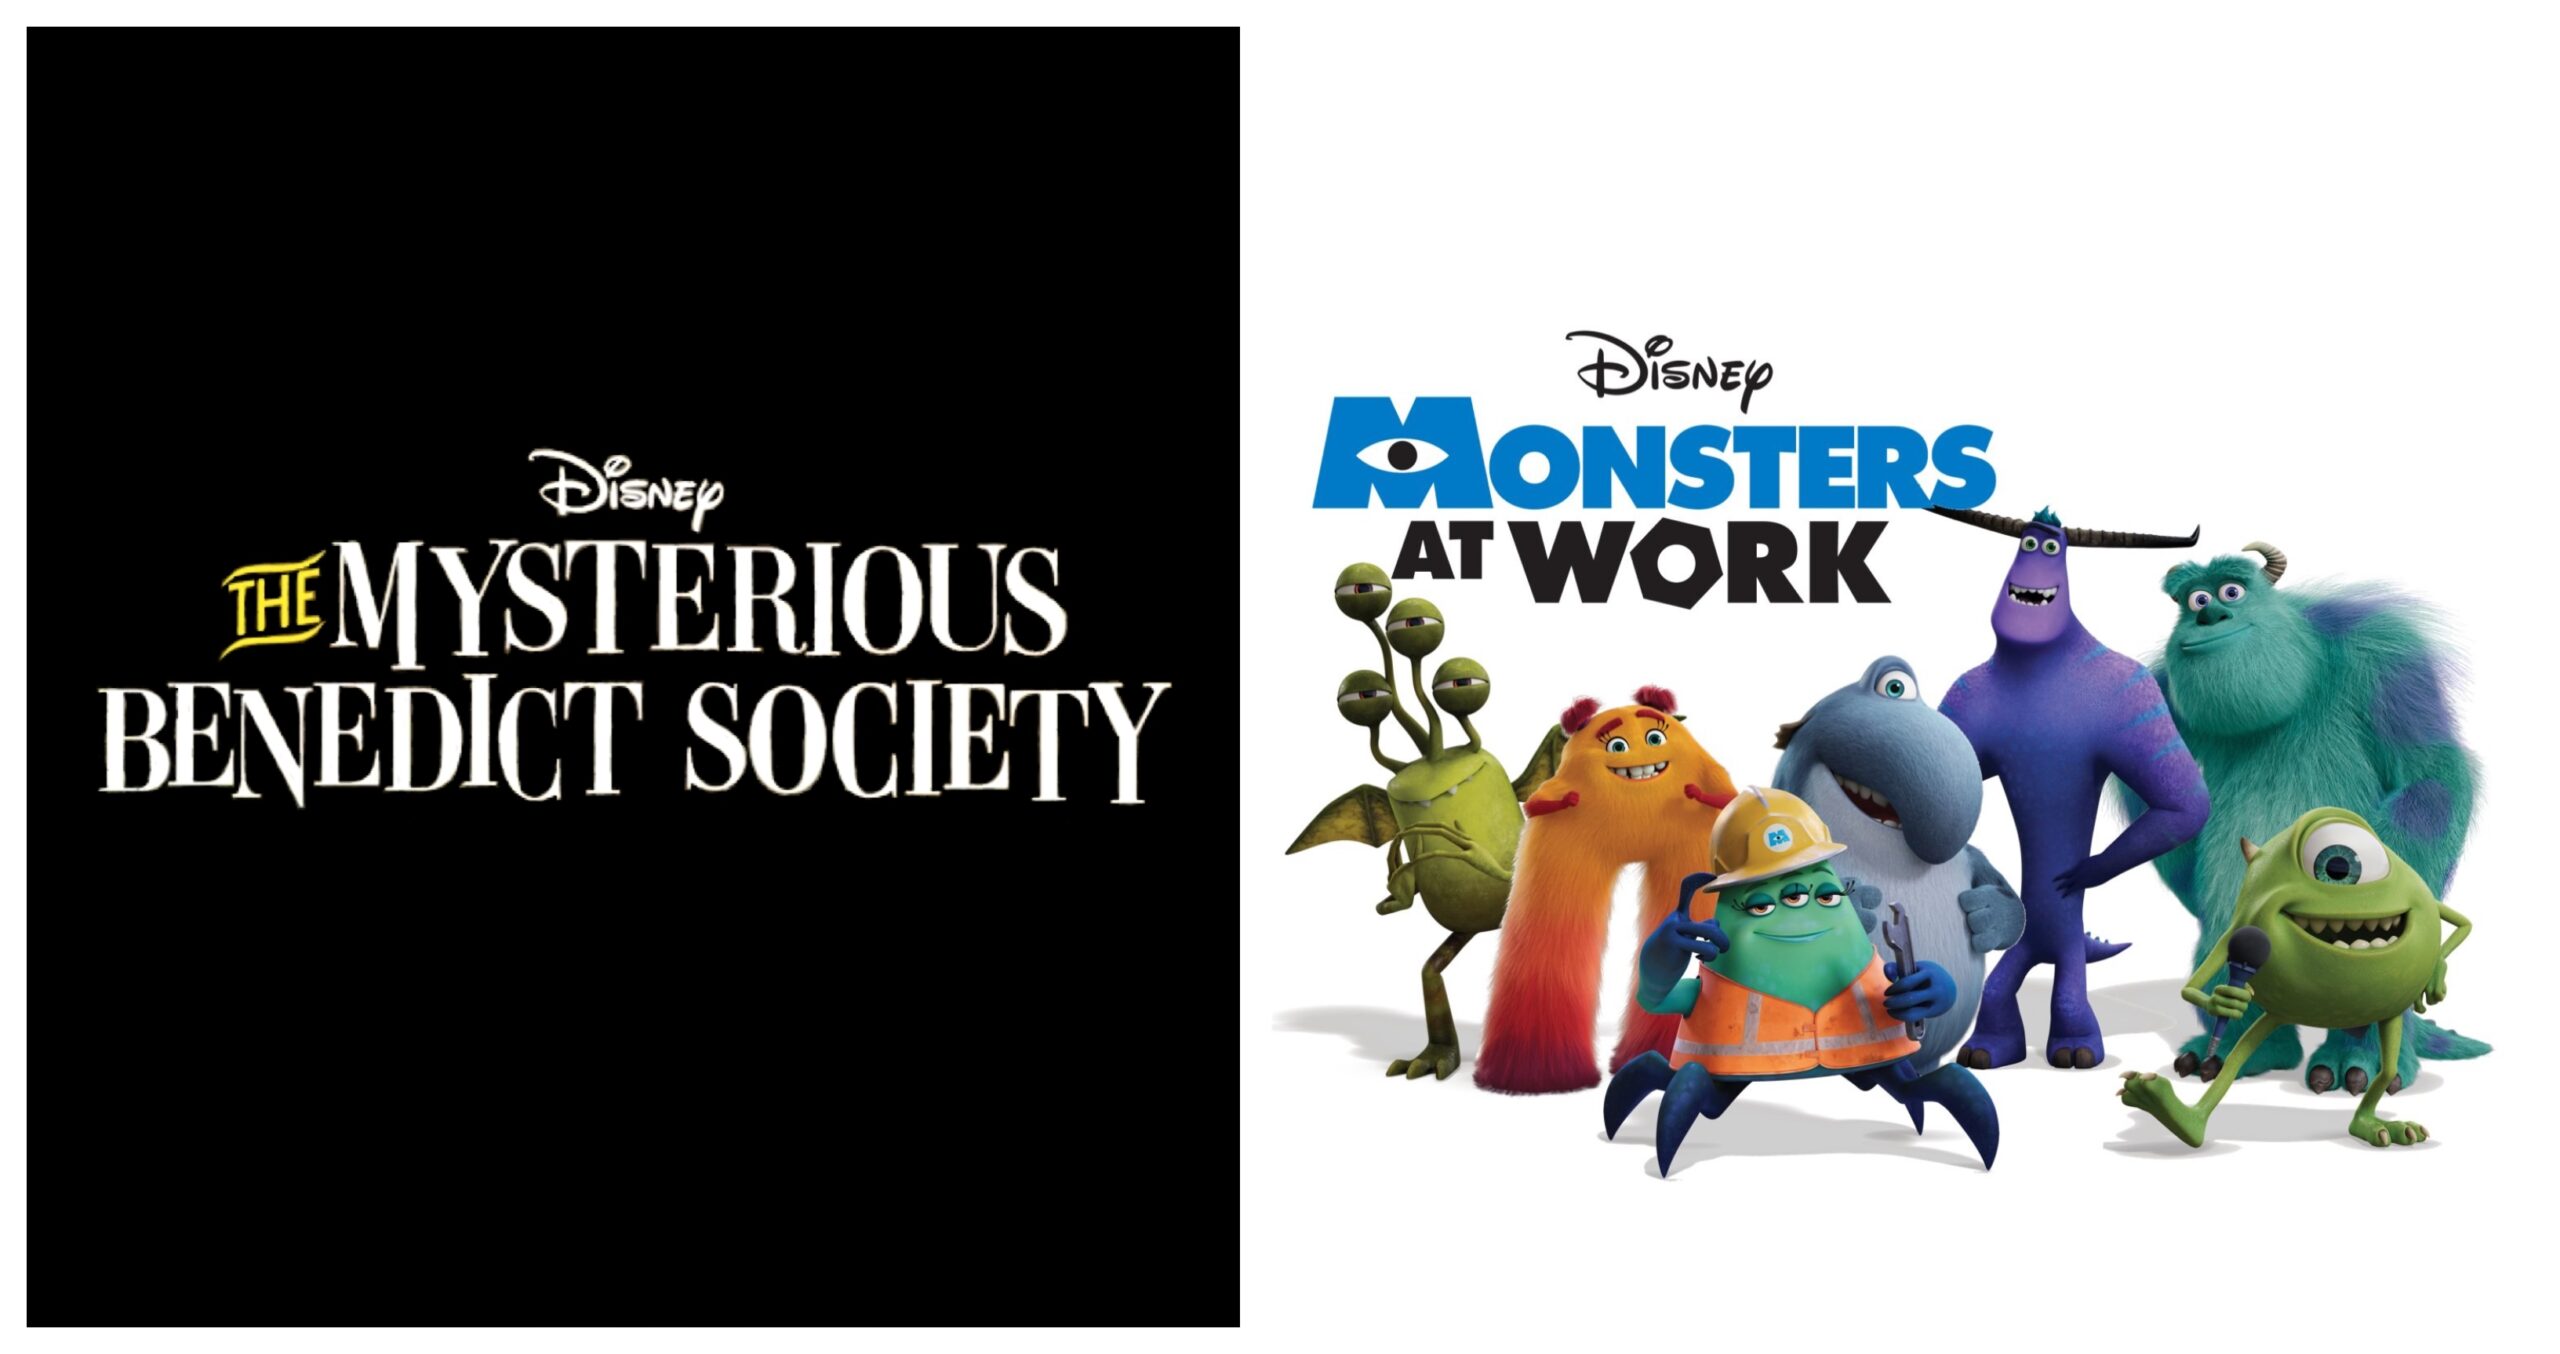 The Mysterious Benedict Society logo (left) and Monsters at Work logo and characters (right)